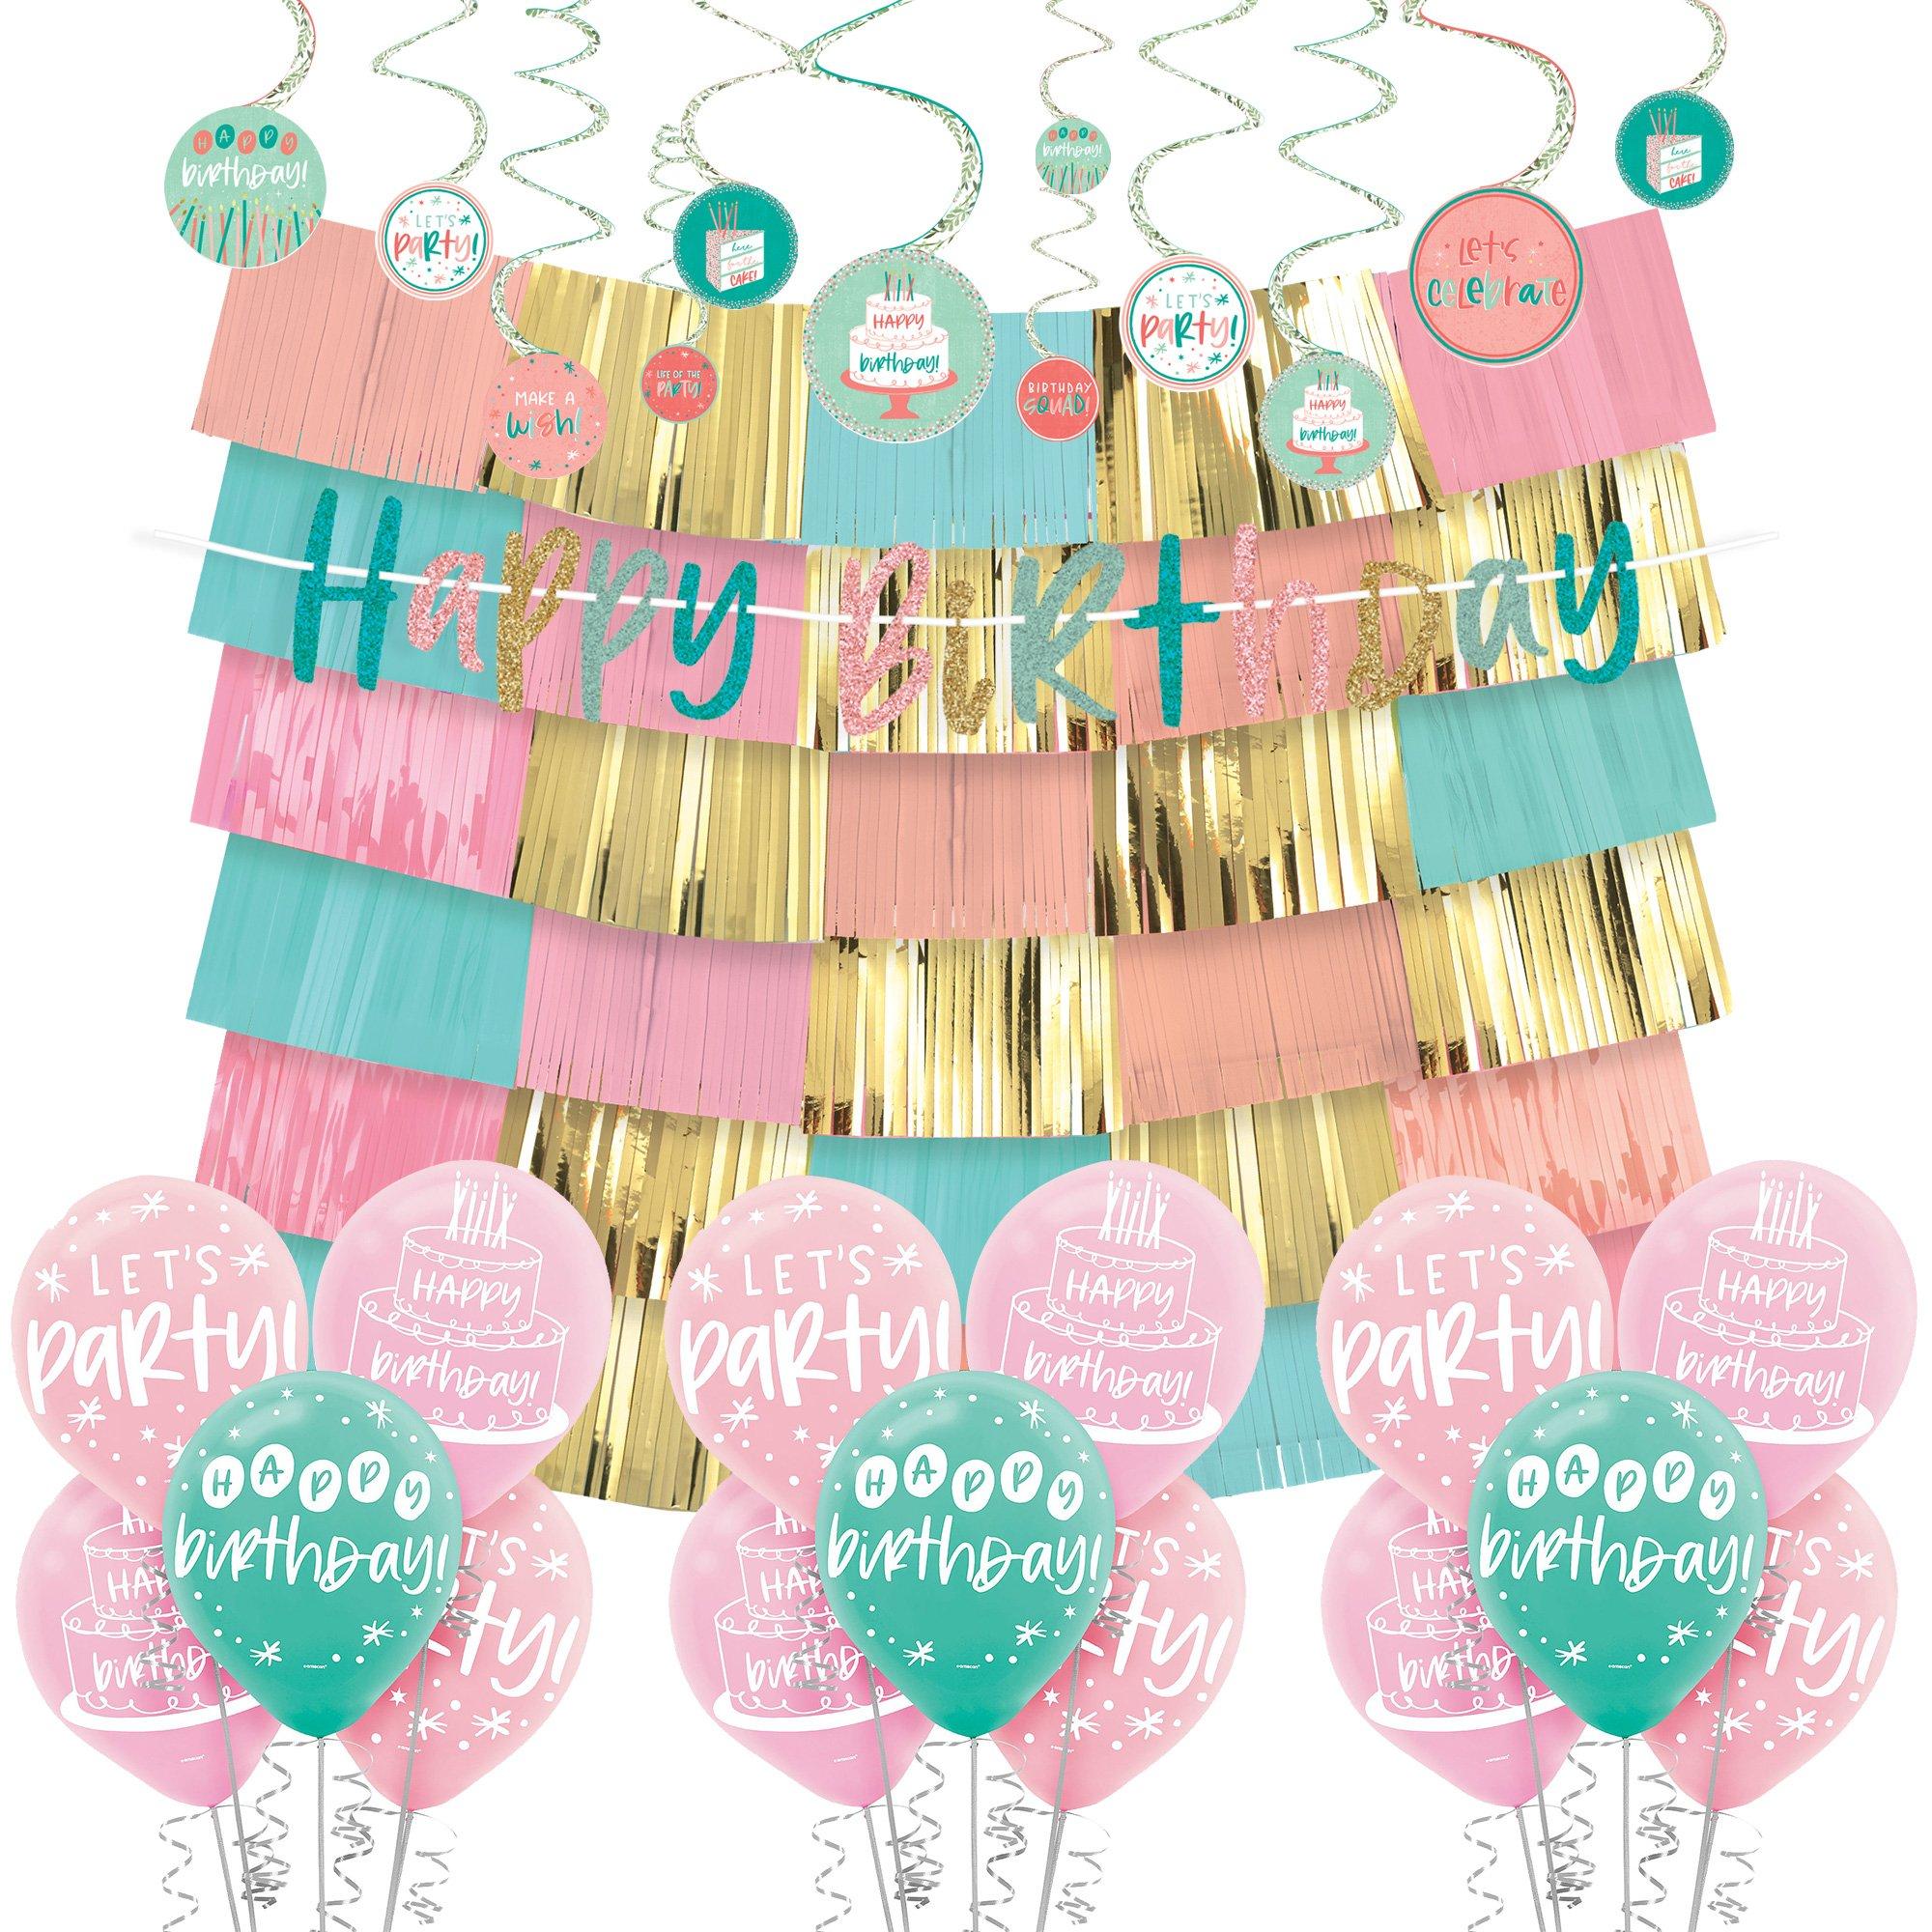 Happy Cake Day Birthday Room Decorating Kit Deluxe | Party City